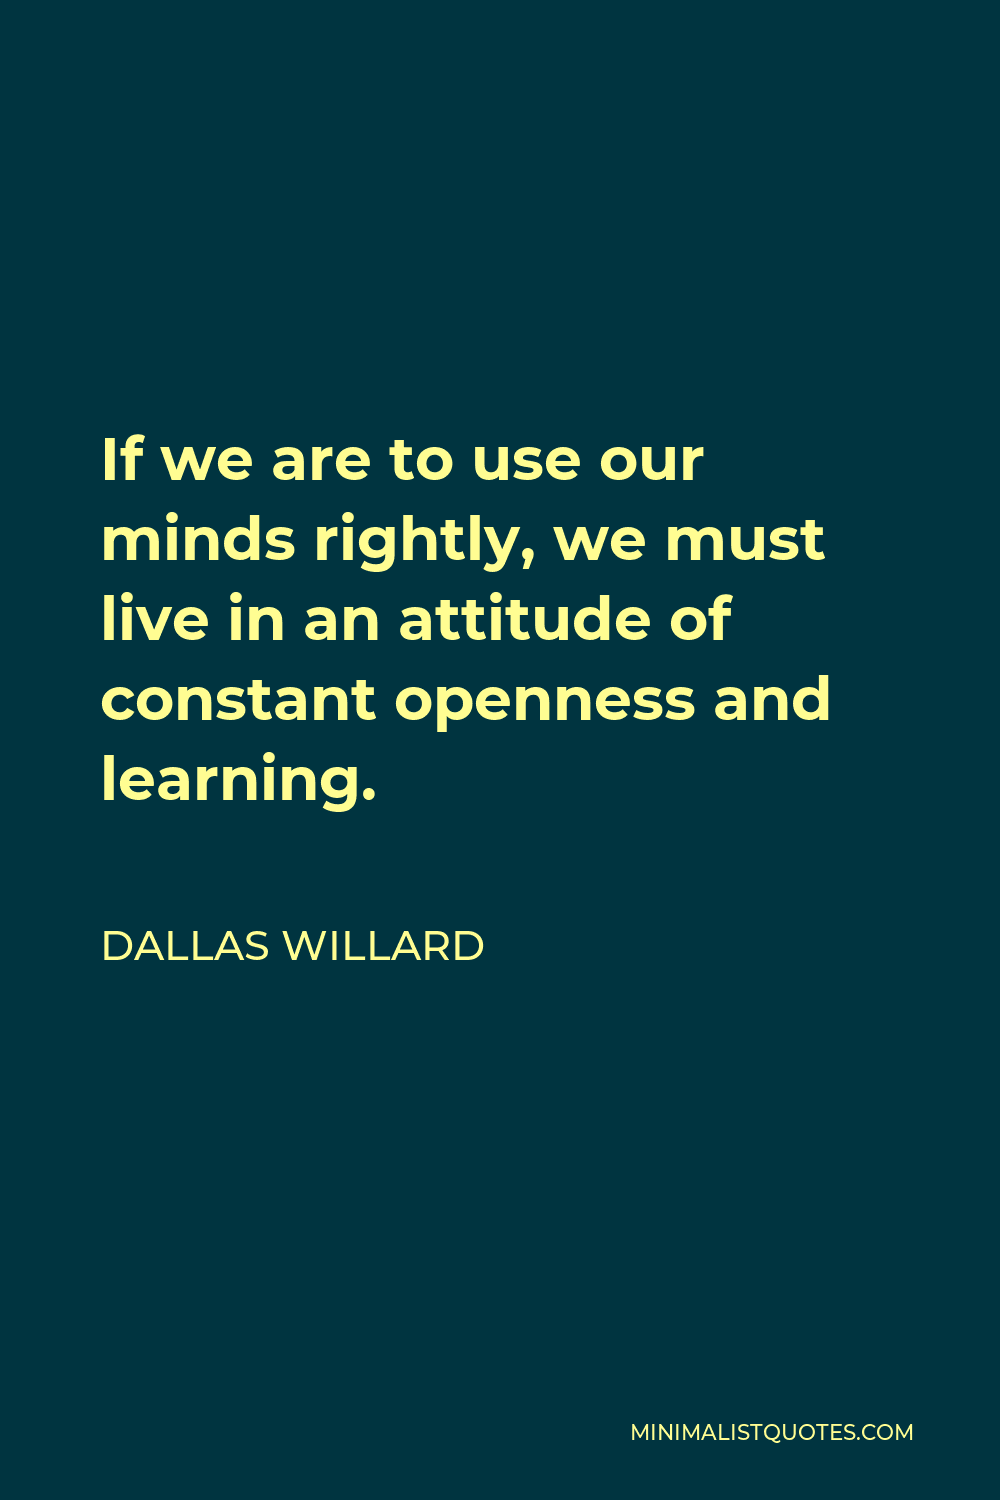 Dallas Willard Quote - If we are to use our minds rightly, we must live in an attitude of constant openness and learning.